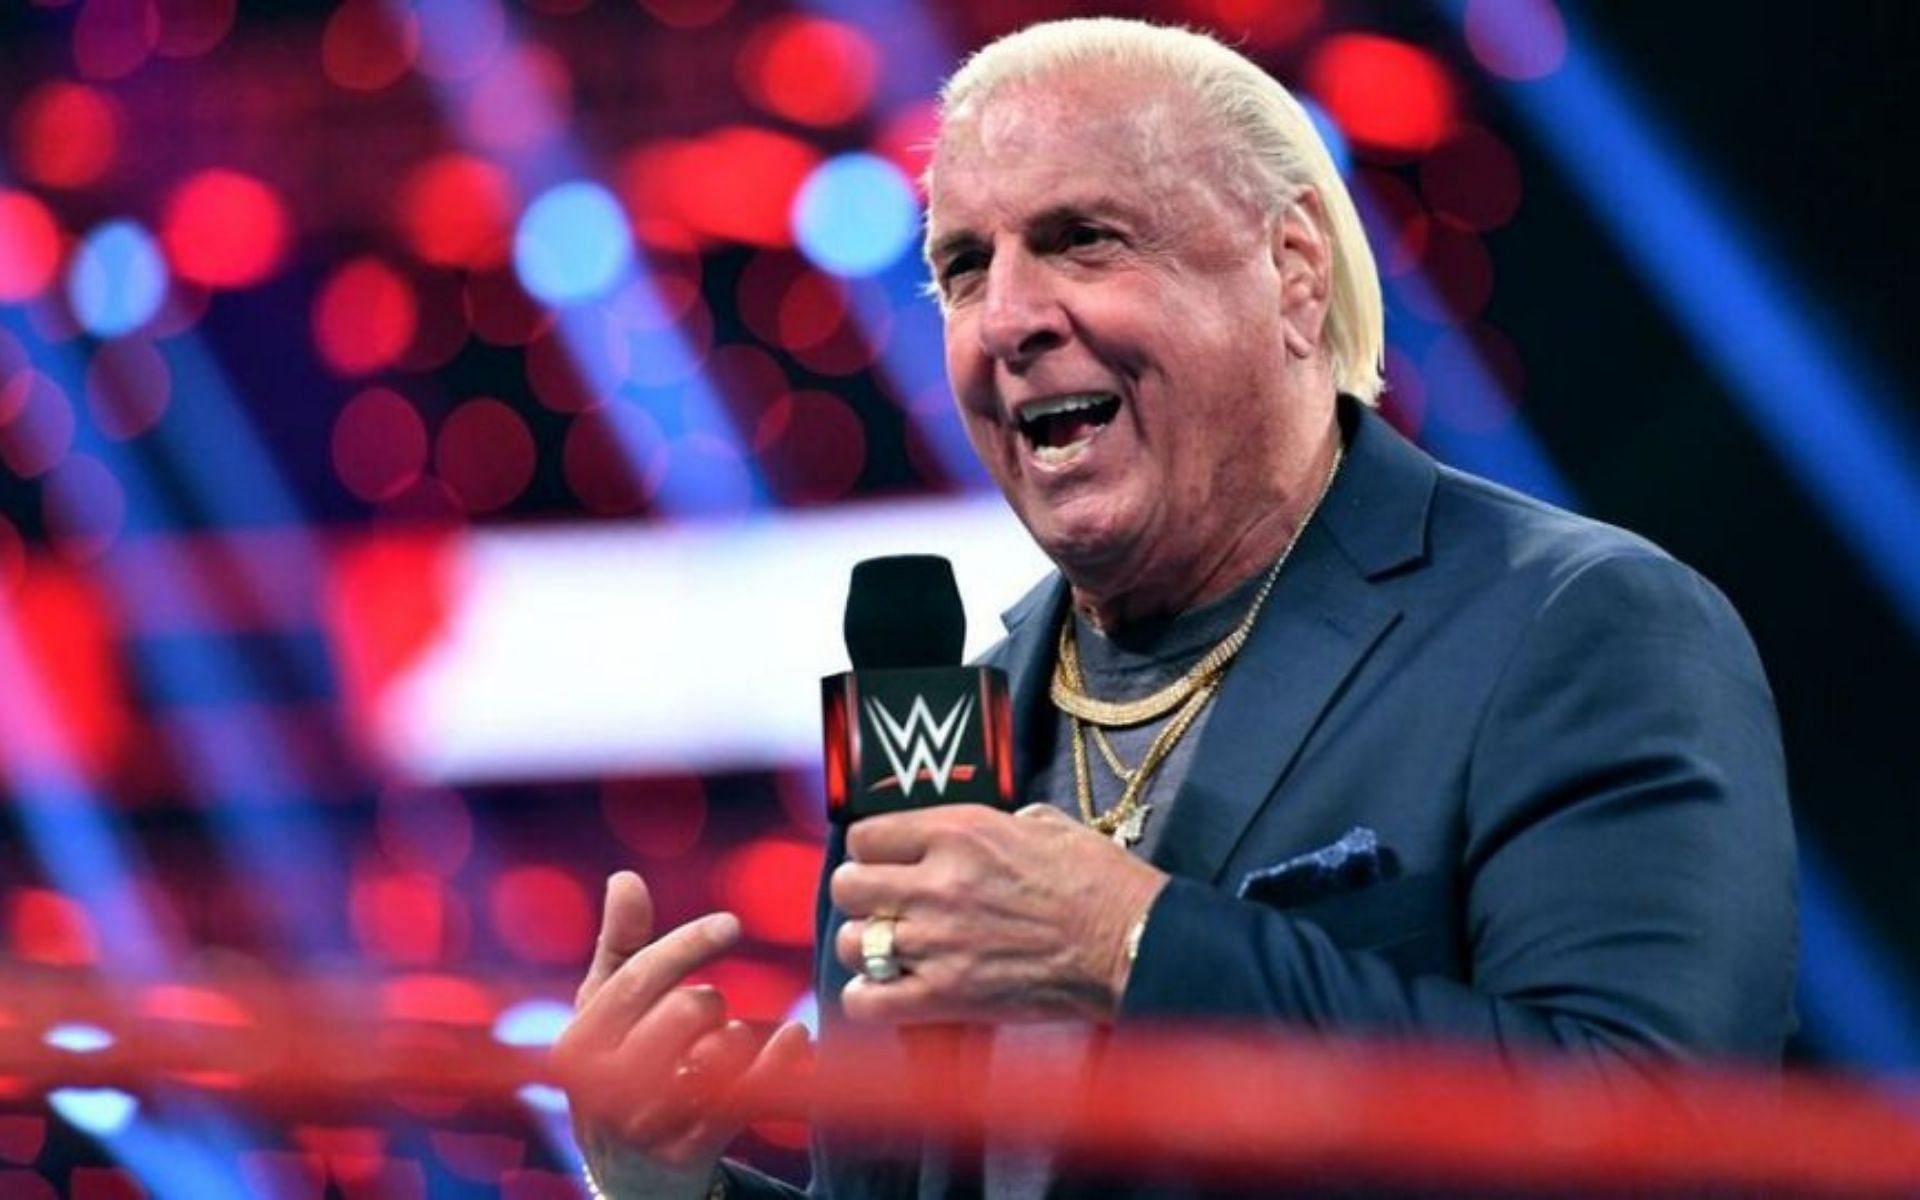 Ric Flair is to return to in-ring action at 73